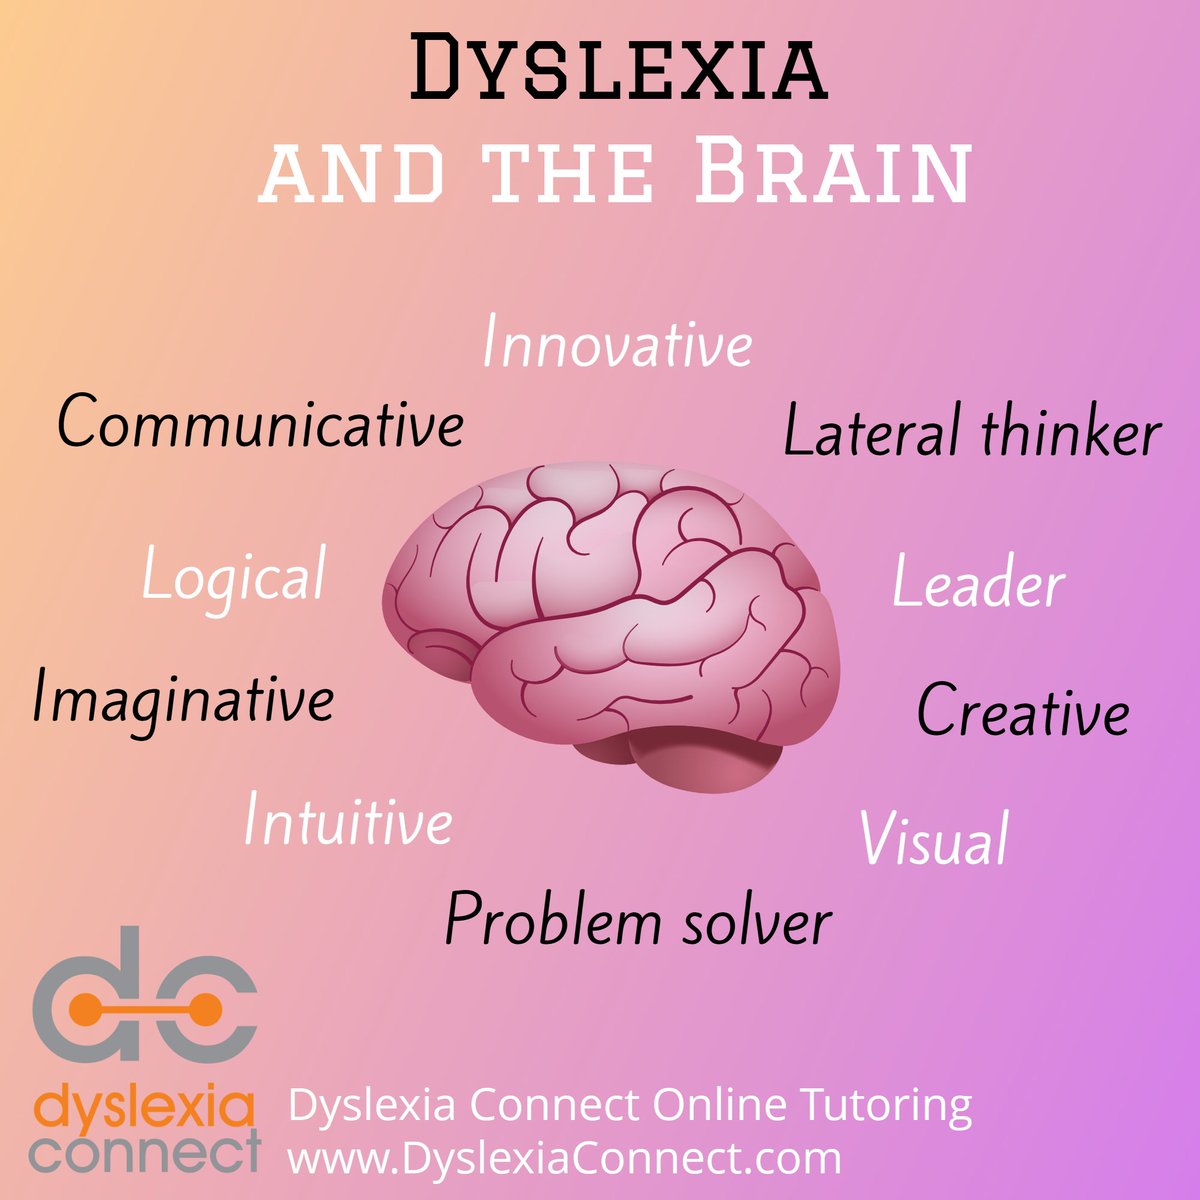 Children and adults with dyslexia often have a variety of cognitive strengths! These strengths are part of the reason why we see so many individuals with dyslexia who are successful entrepreneurs, leaders, artists and musicians. DyslexiaConnect.com #dyslexia #adhd #dysgraphia